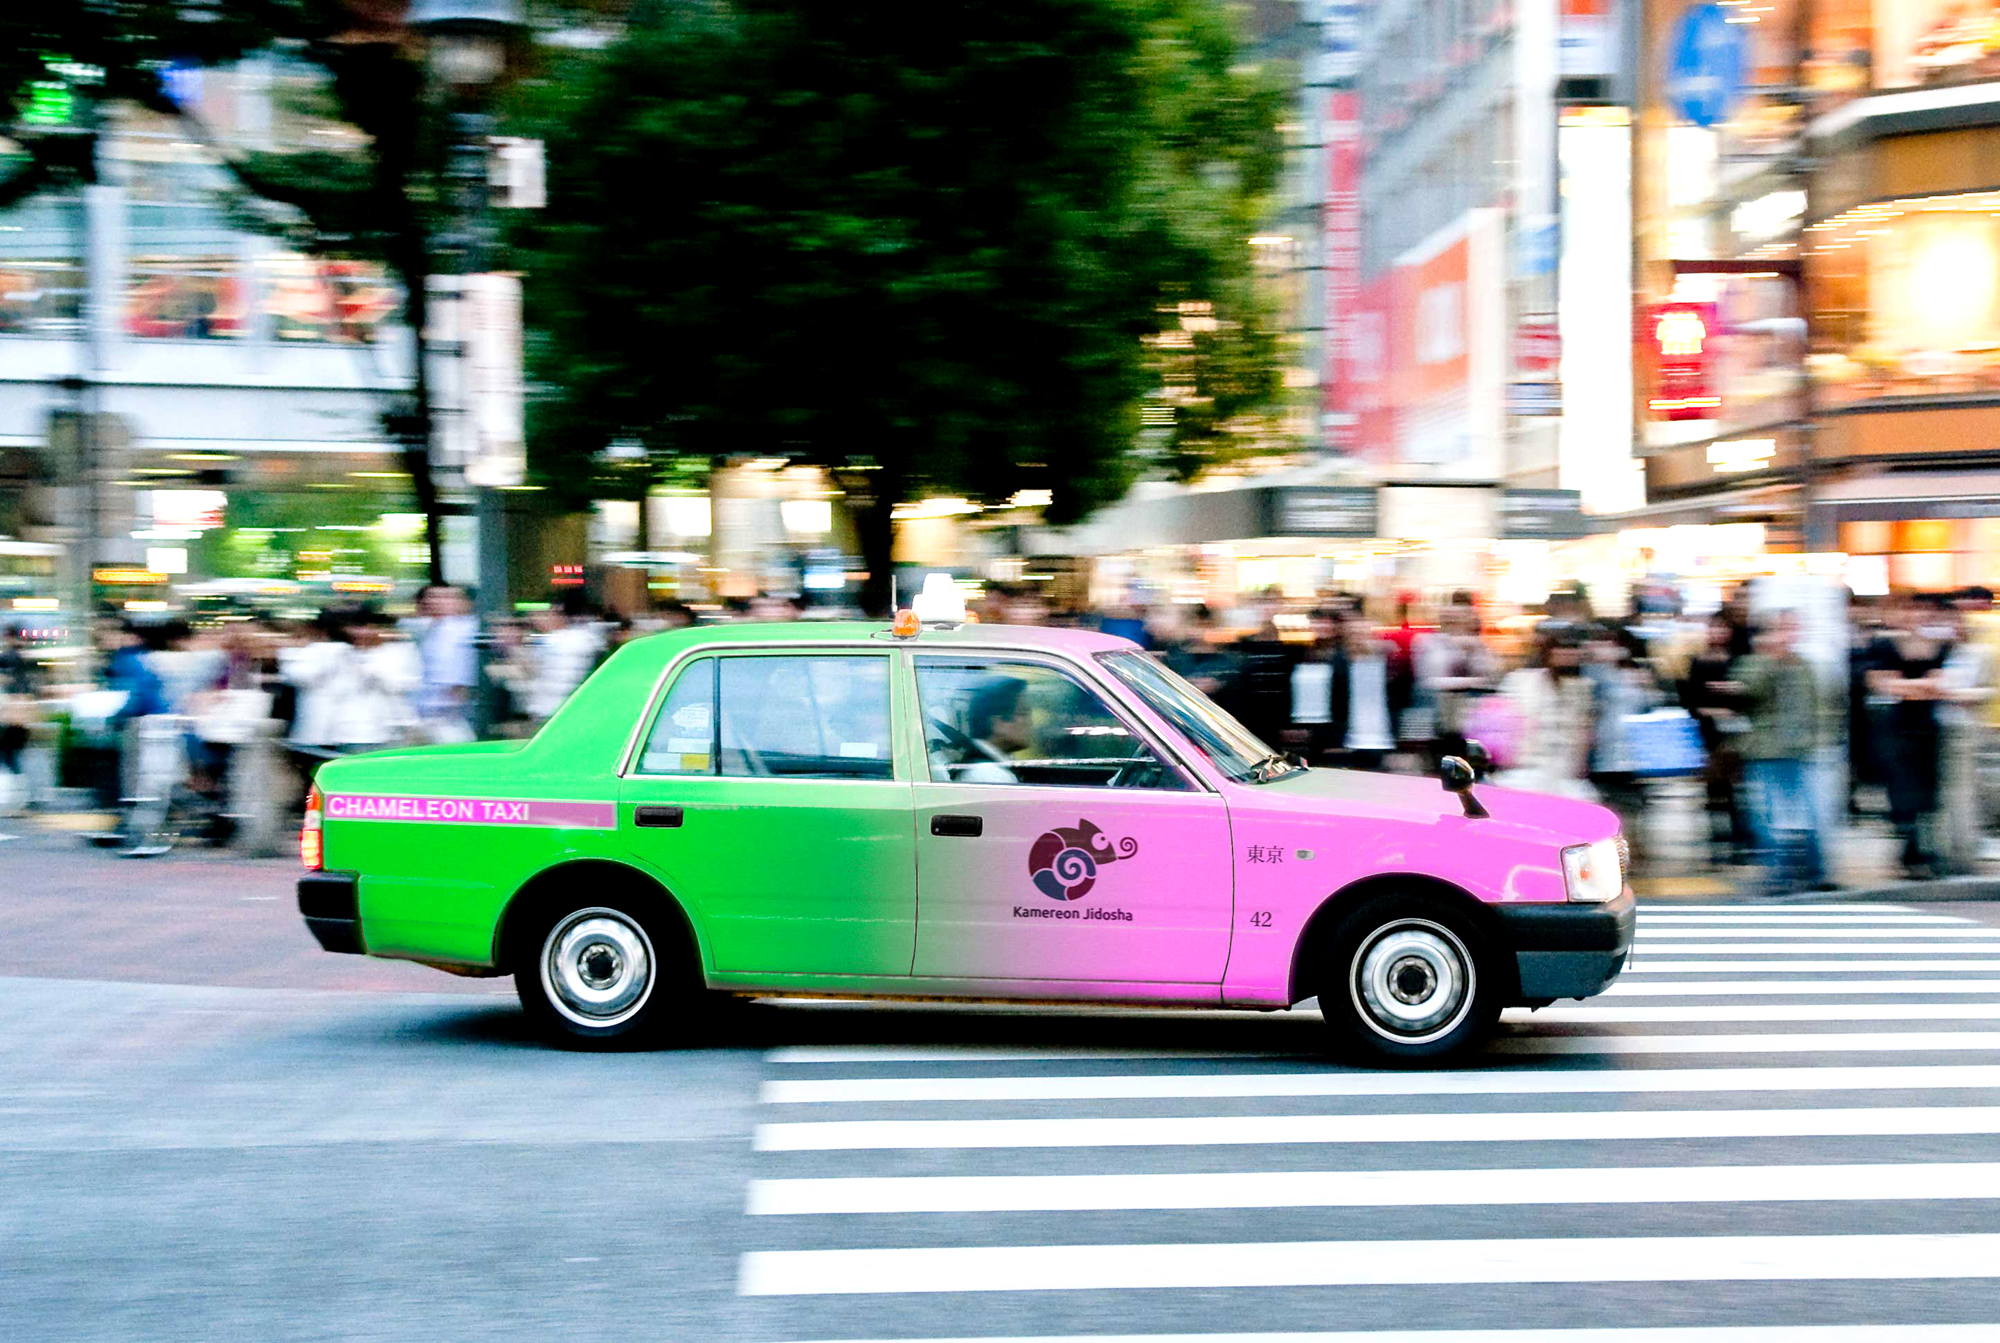 With taxis that change color to indicate their status, Kamereon Jidosha K.K. is hoping to stand out among the competition in Tokyo. | GETTY IMAGES / THE JAPAN TIMES